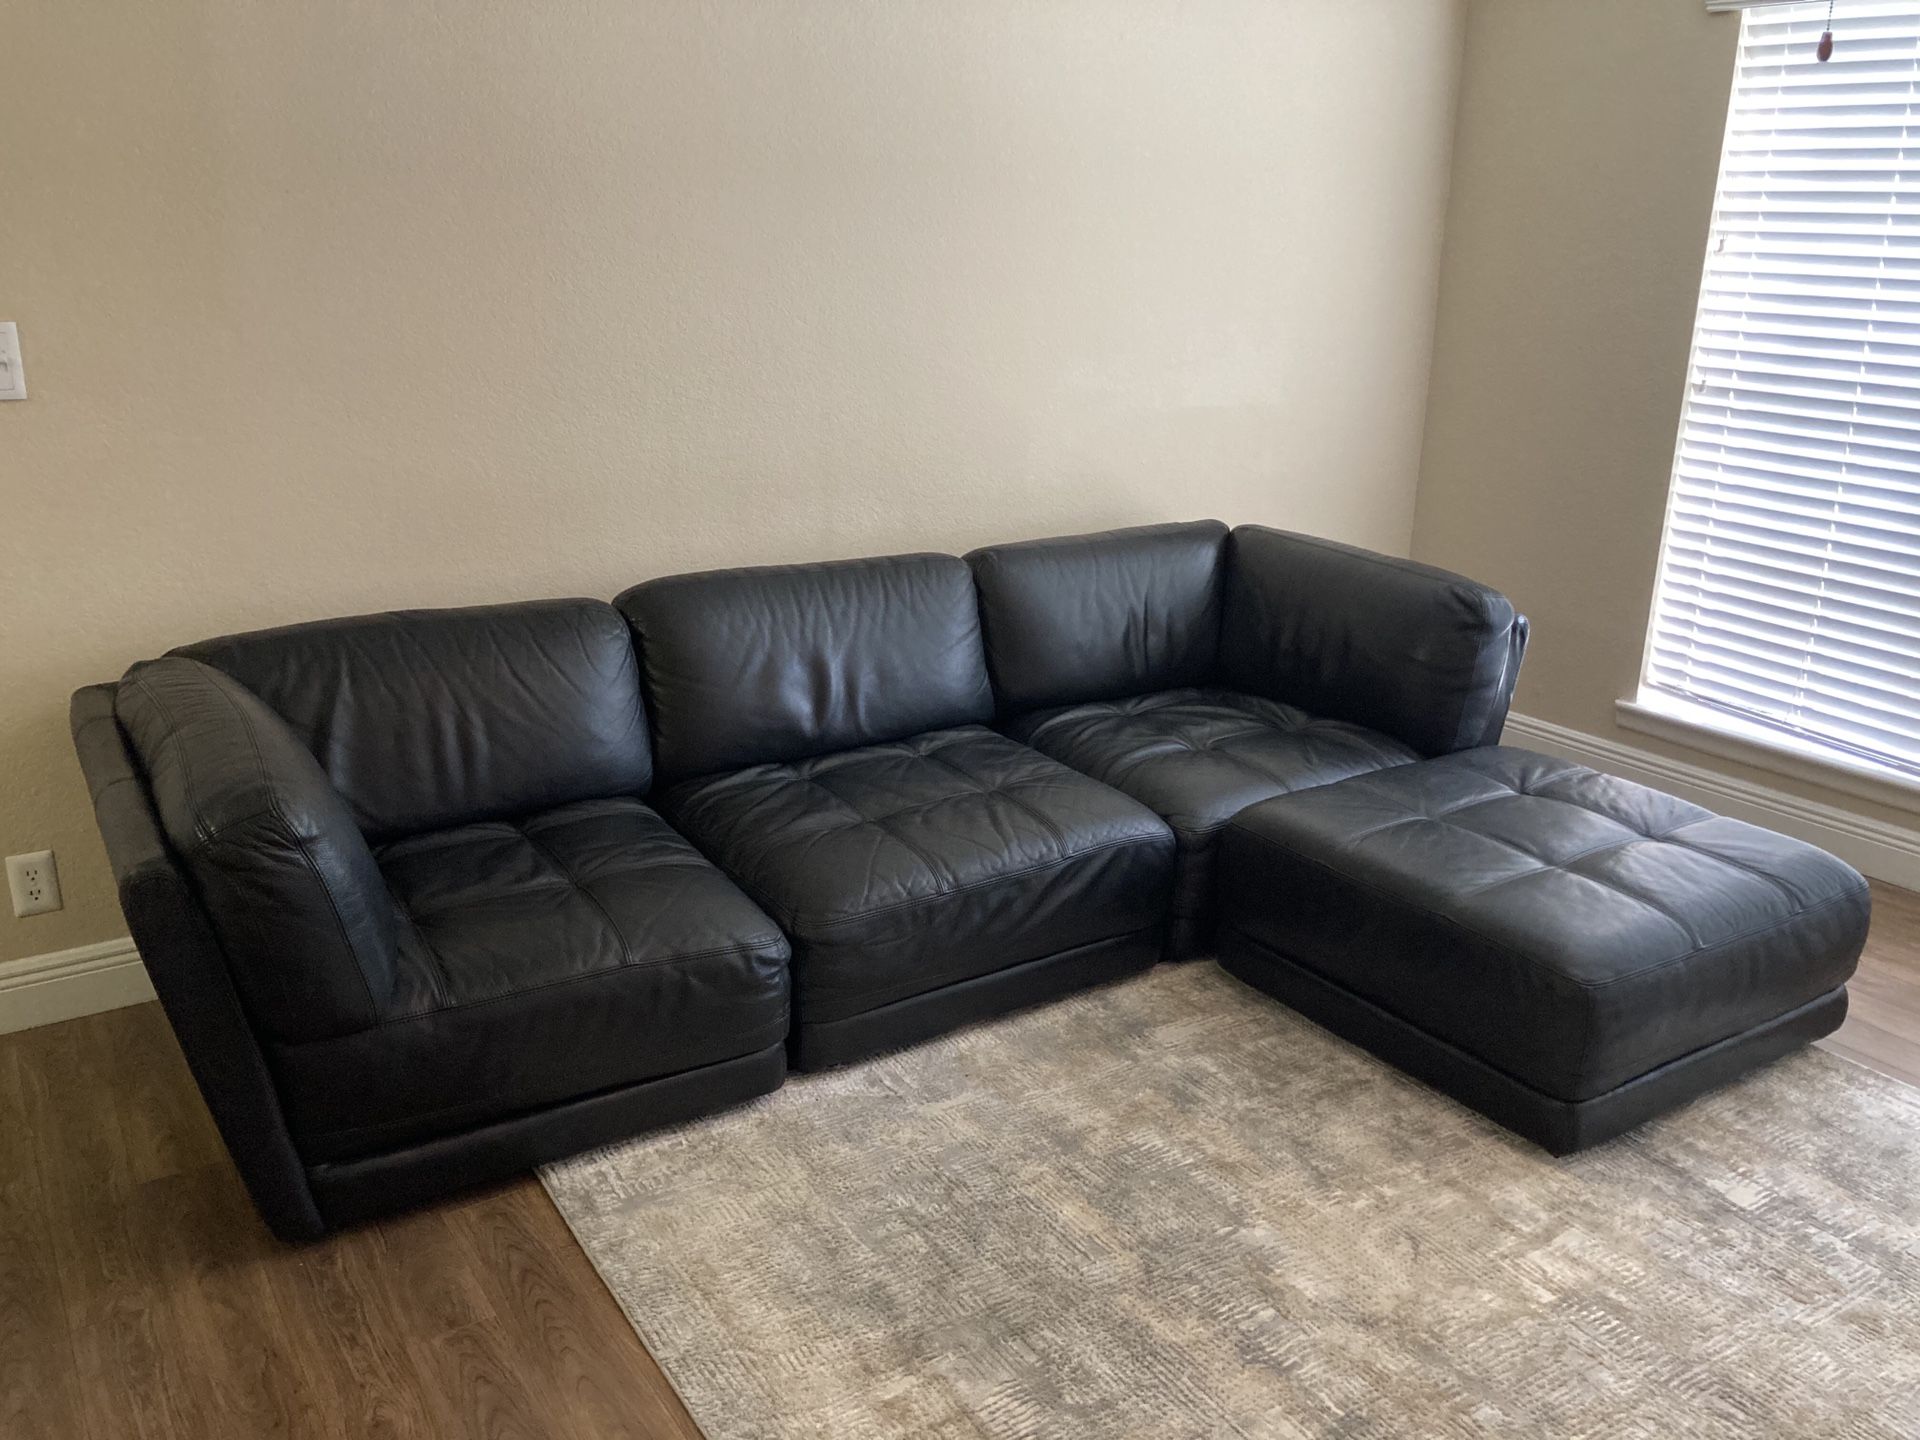 Chateau D’ax Black Leather Sectional